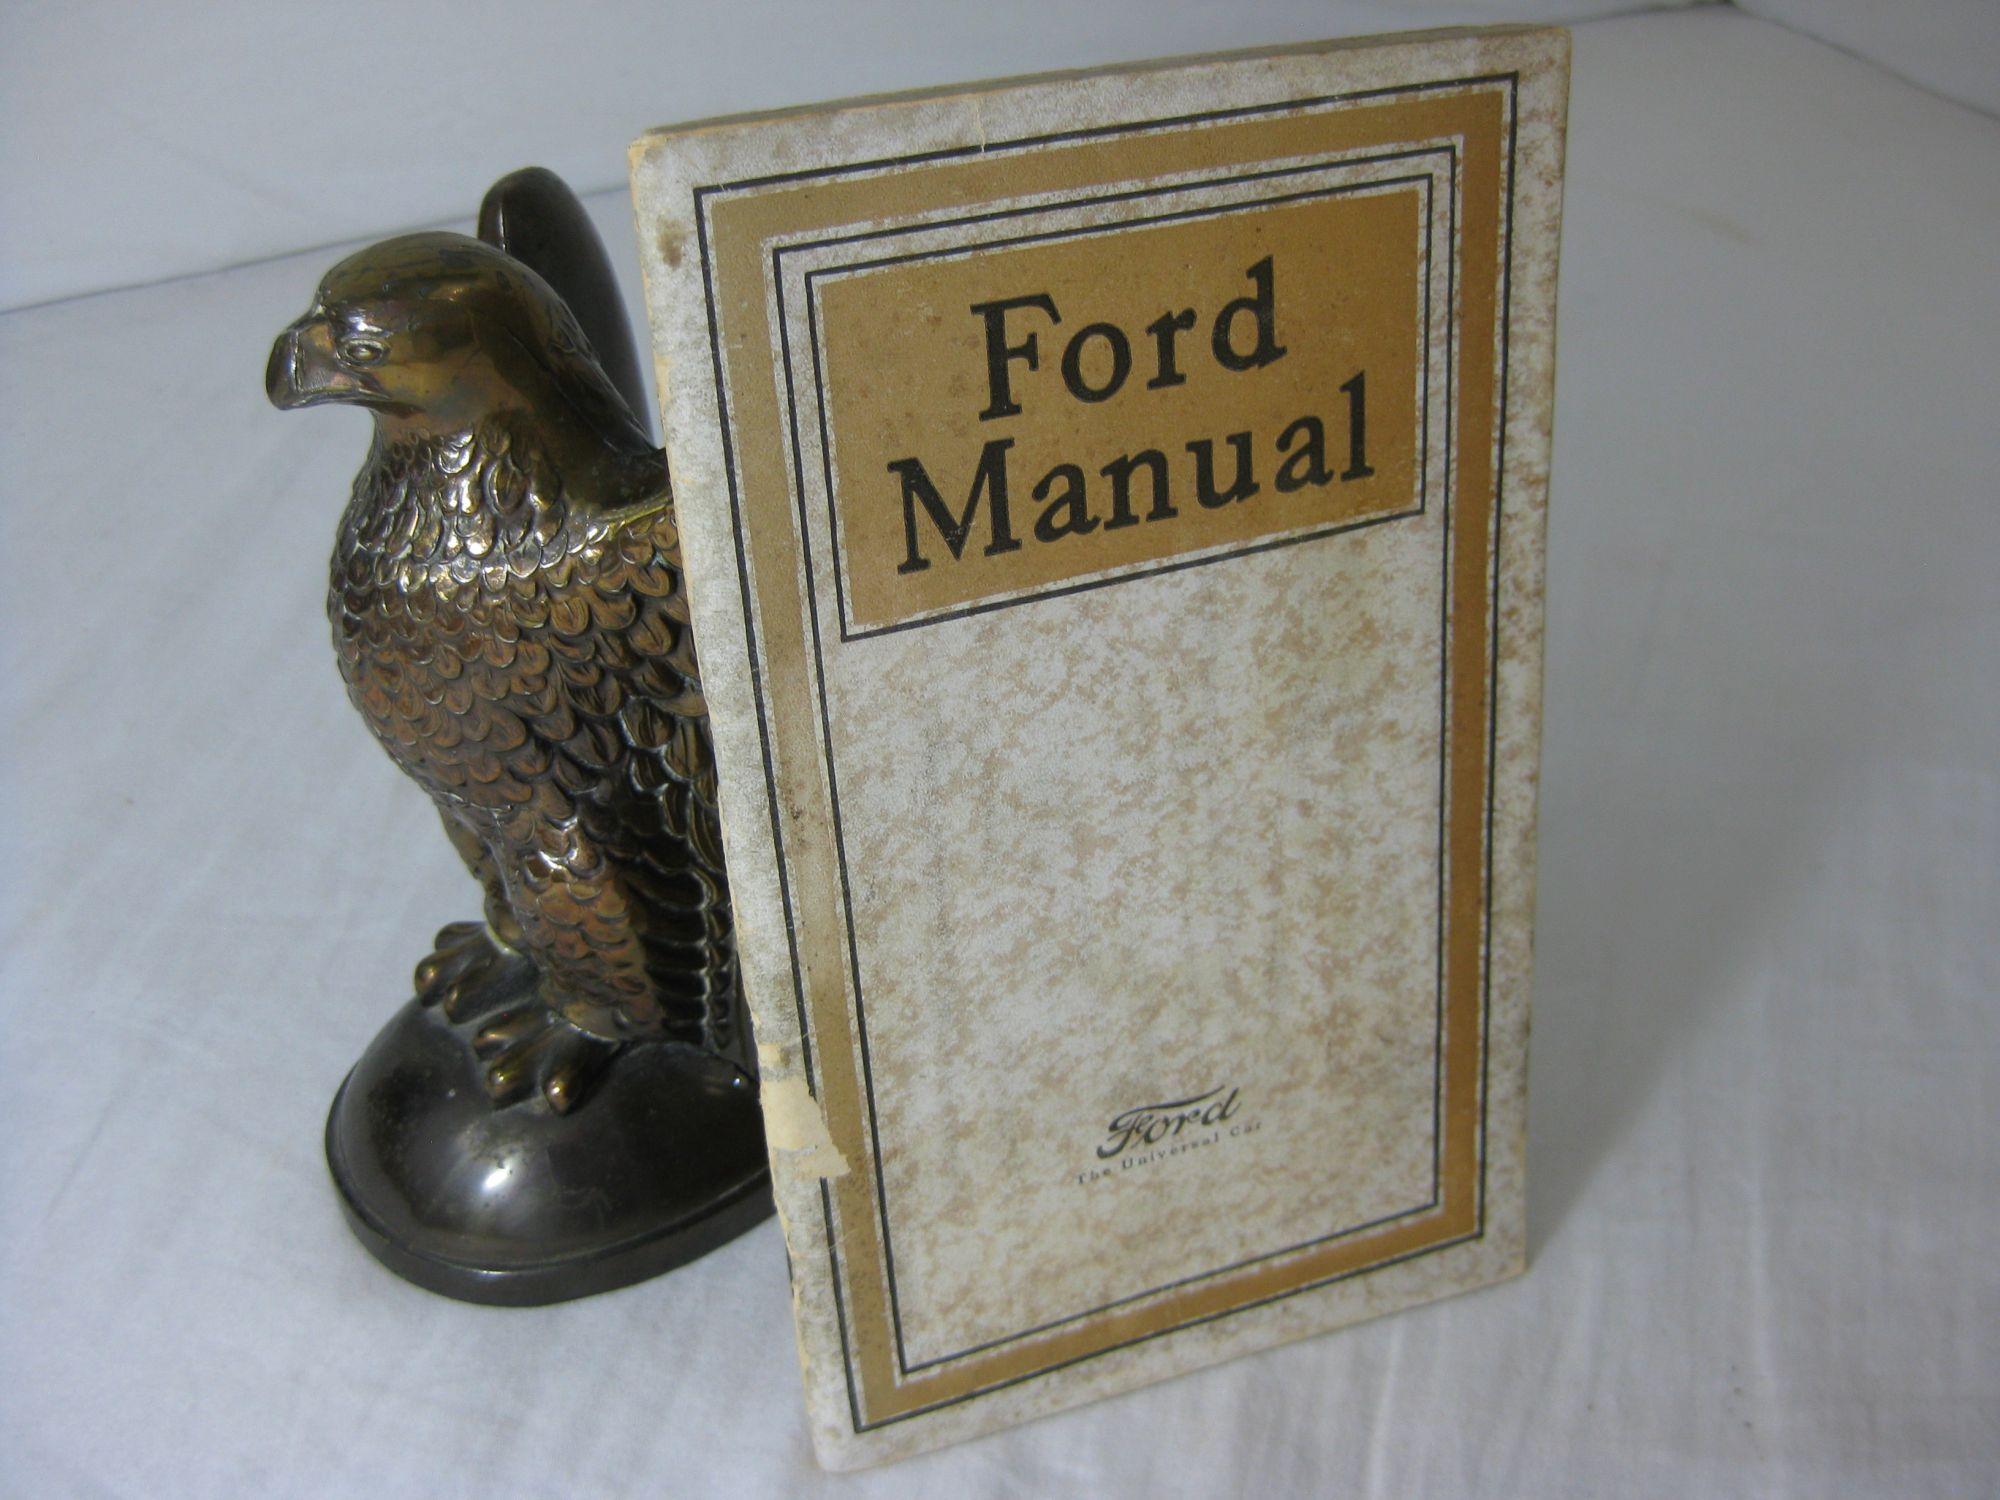 FORD MANUAL. For Owners and Operators of Ford Cars and Trucks by The